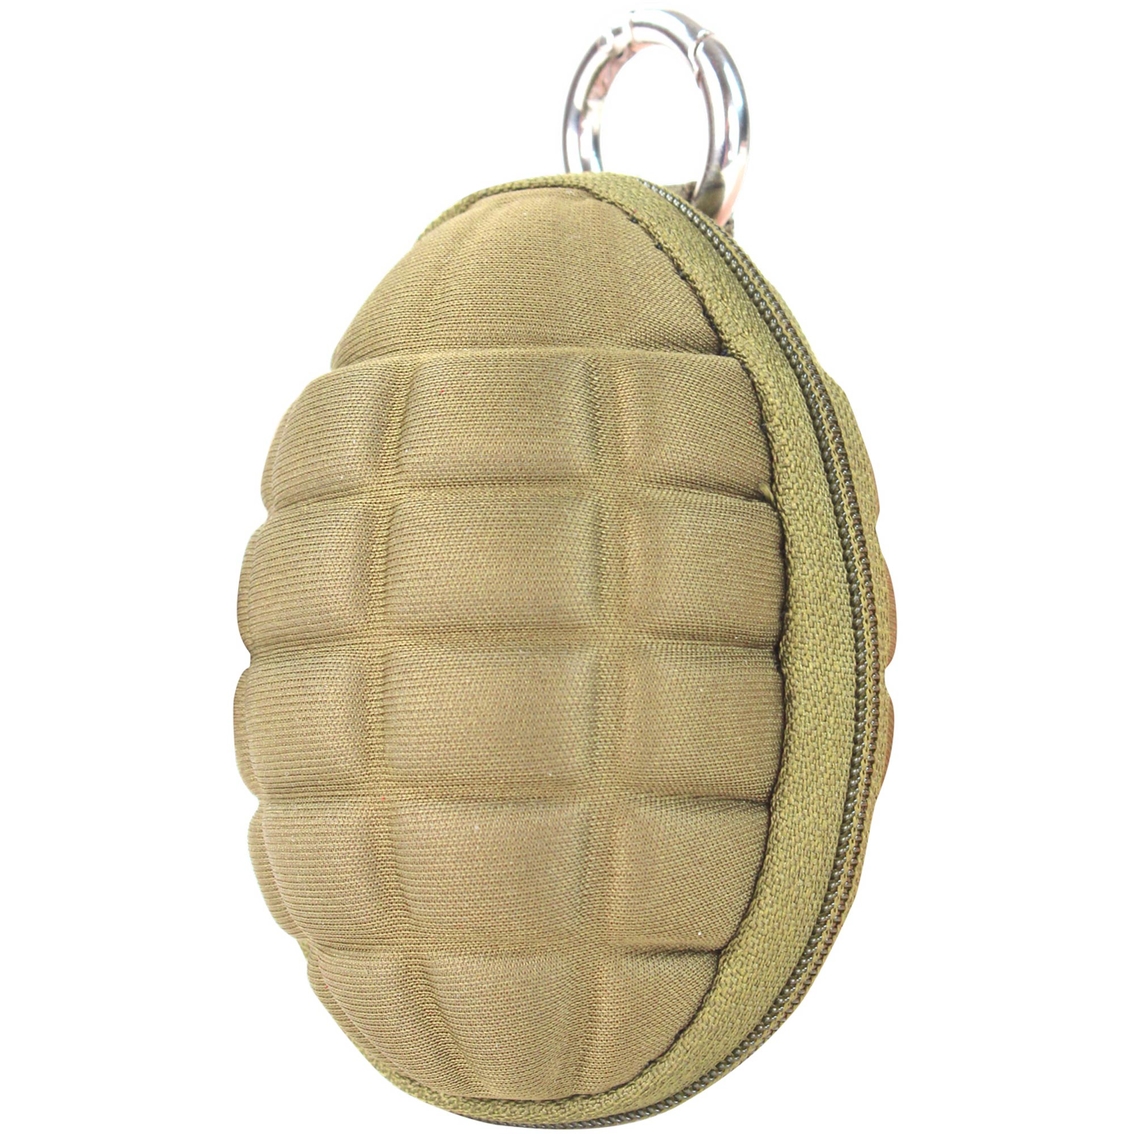 Condor Grenade Keychain Zippered Coin Money Change Wallet Pocket Pouch OD Green 